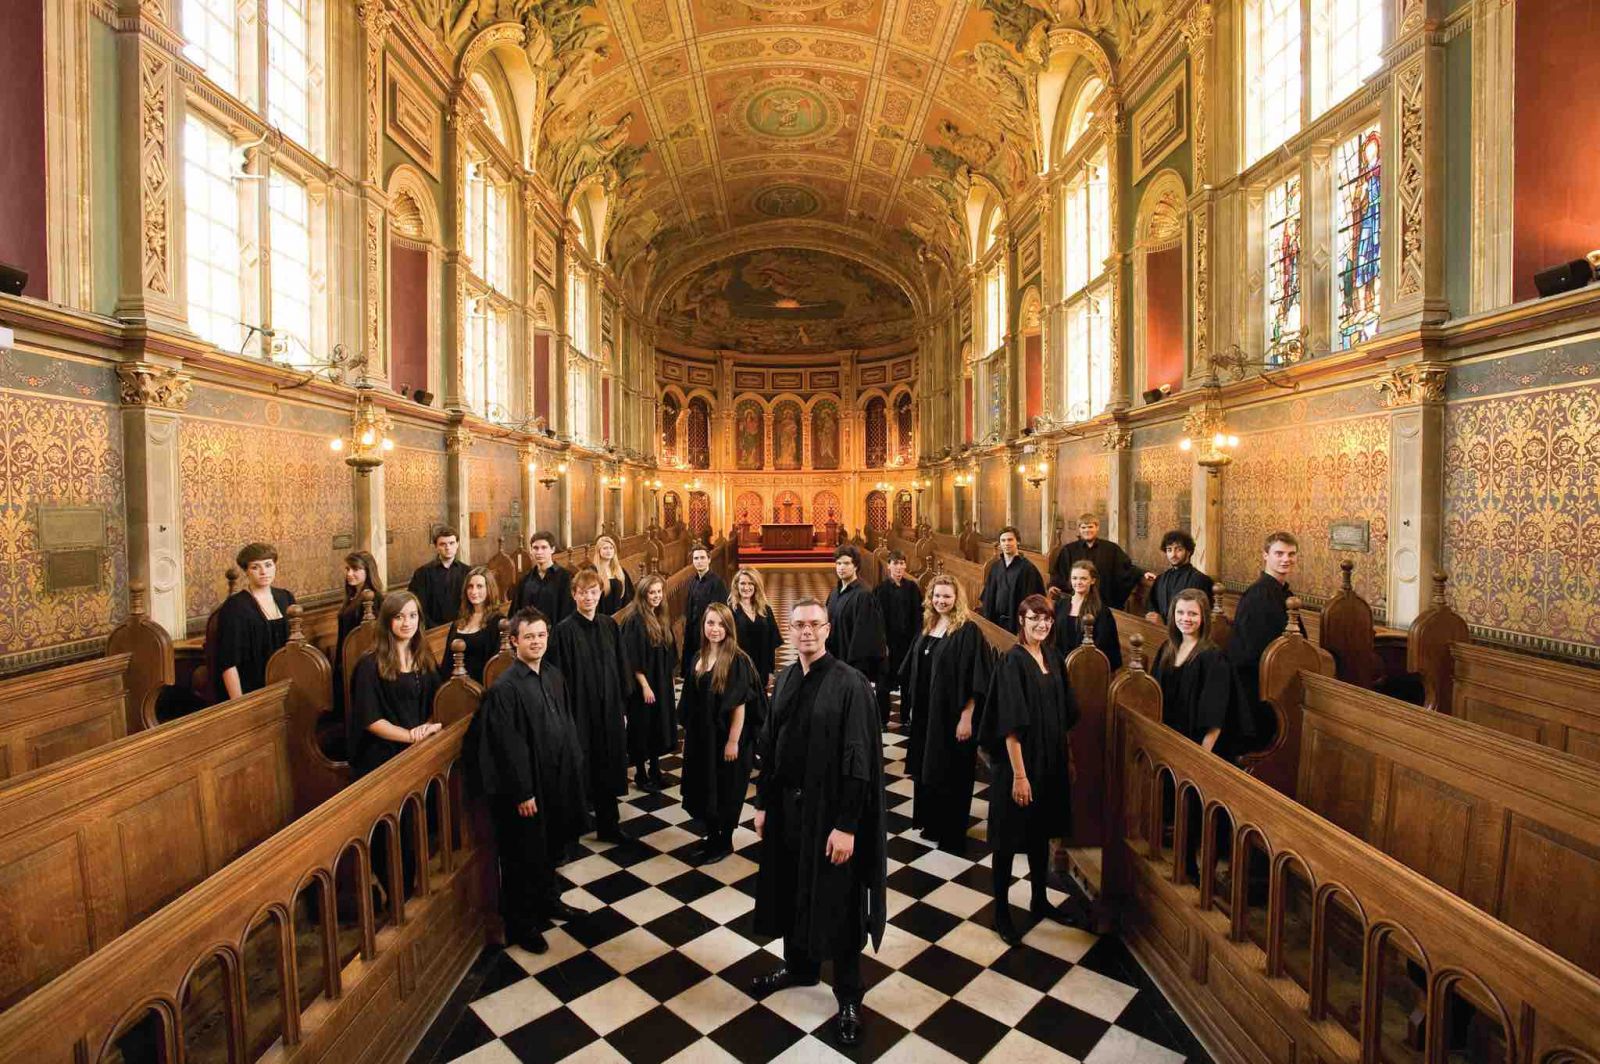 The Choir of Royal Holloway performed with Bristol Ensemble at St George's in Bristol